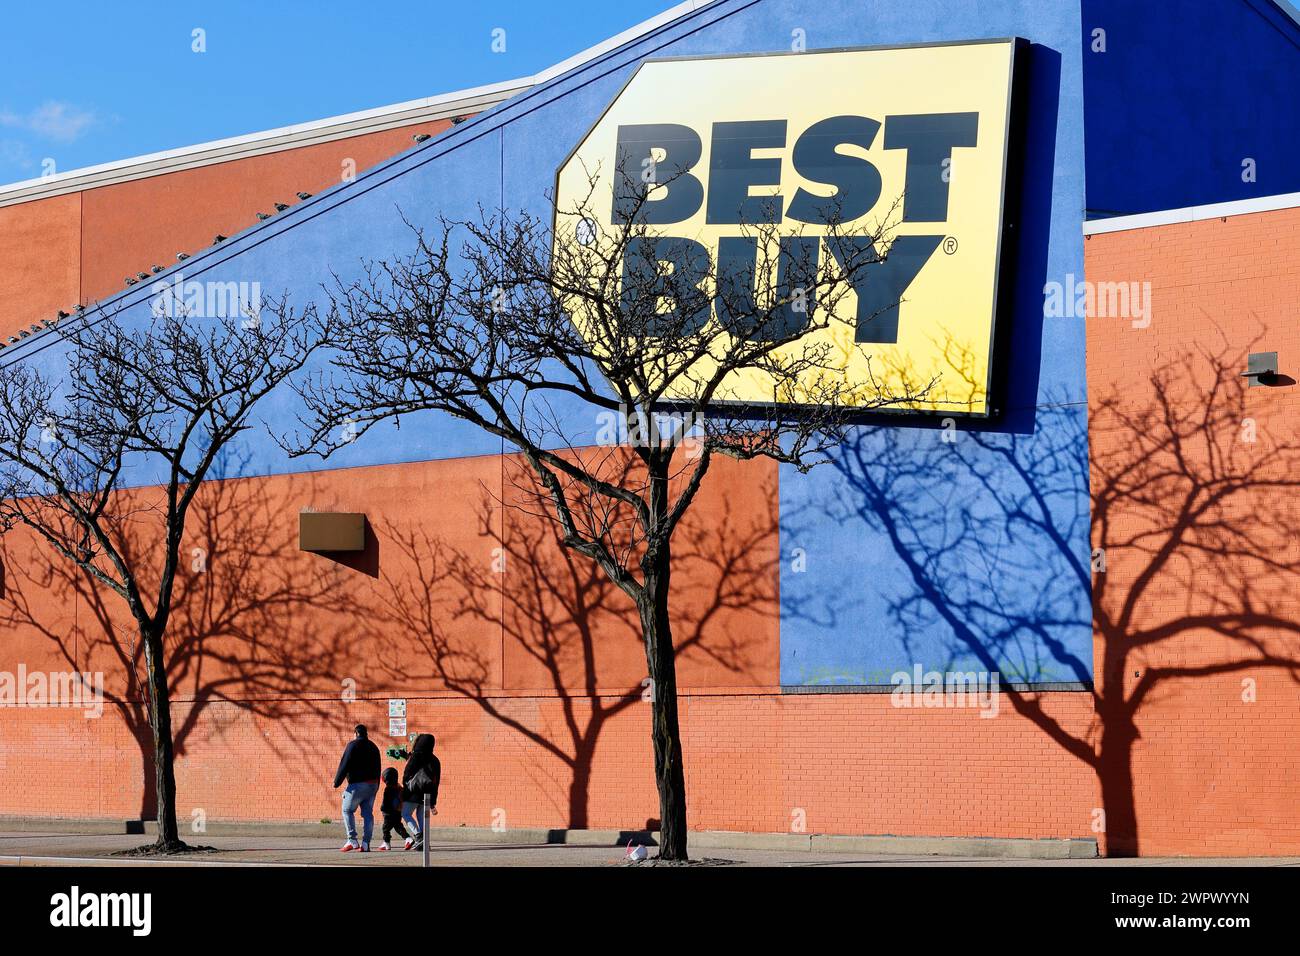 People walking past a gigantic Best Buy sign on the side of a buildingin Queens County, New York City. Best Buy is a consumer electronics retailer. Stock Photo